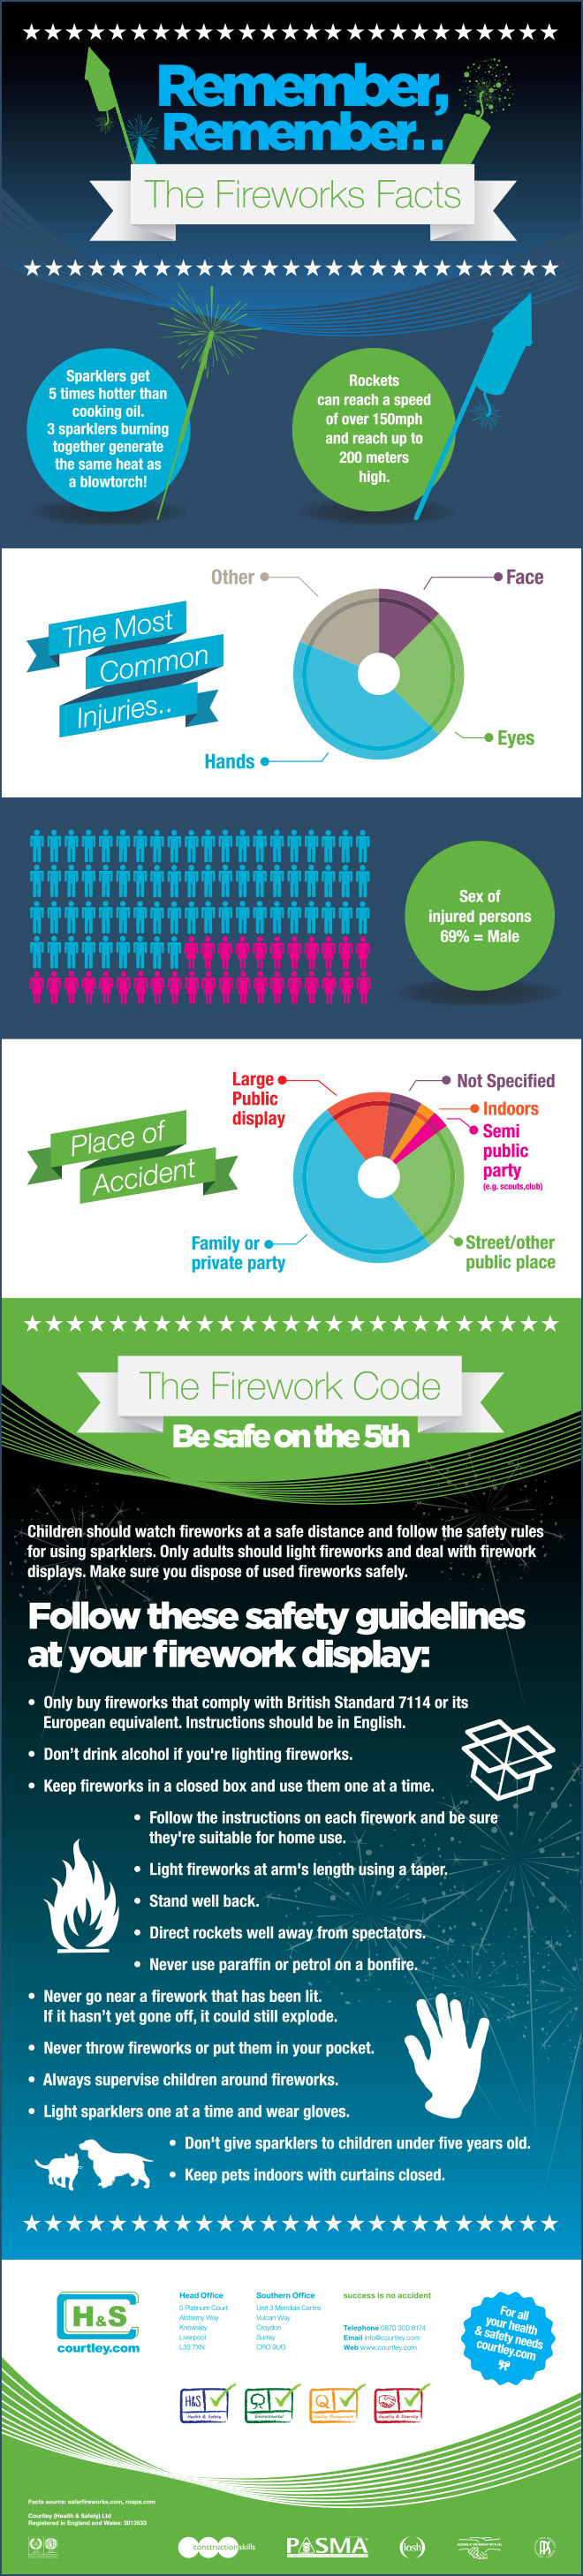 Bonfire Night Health and Safety